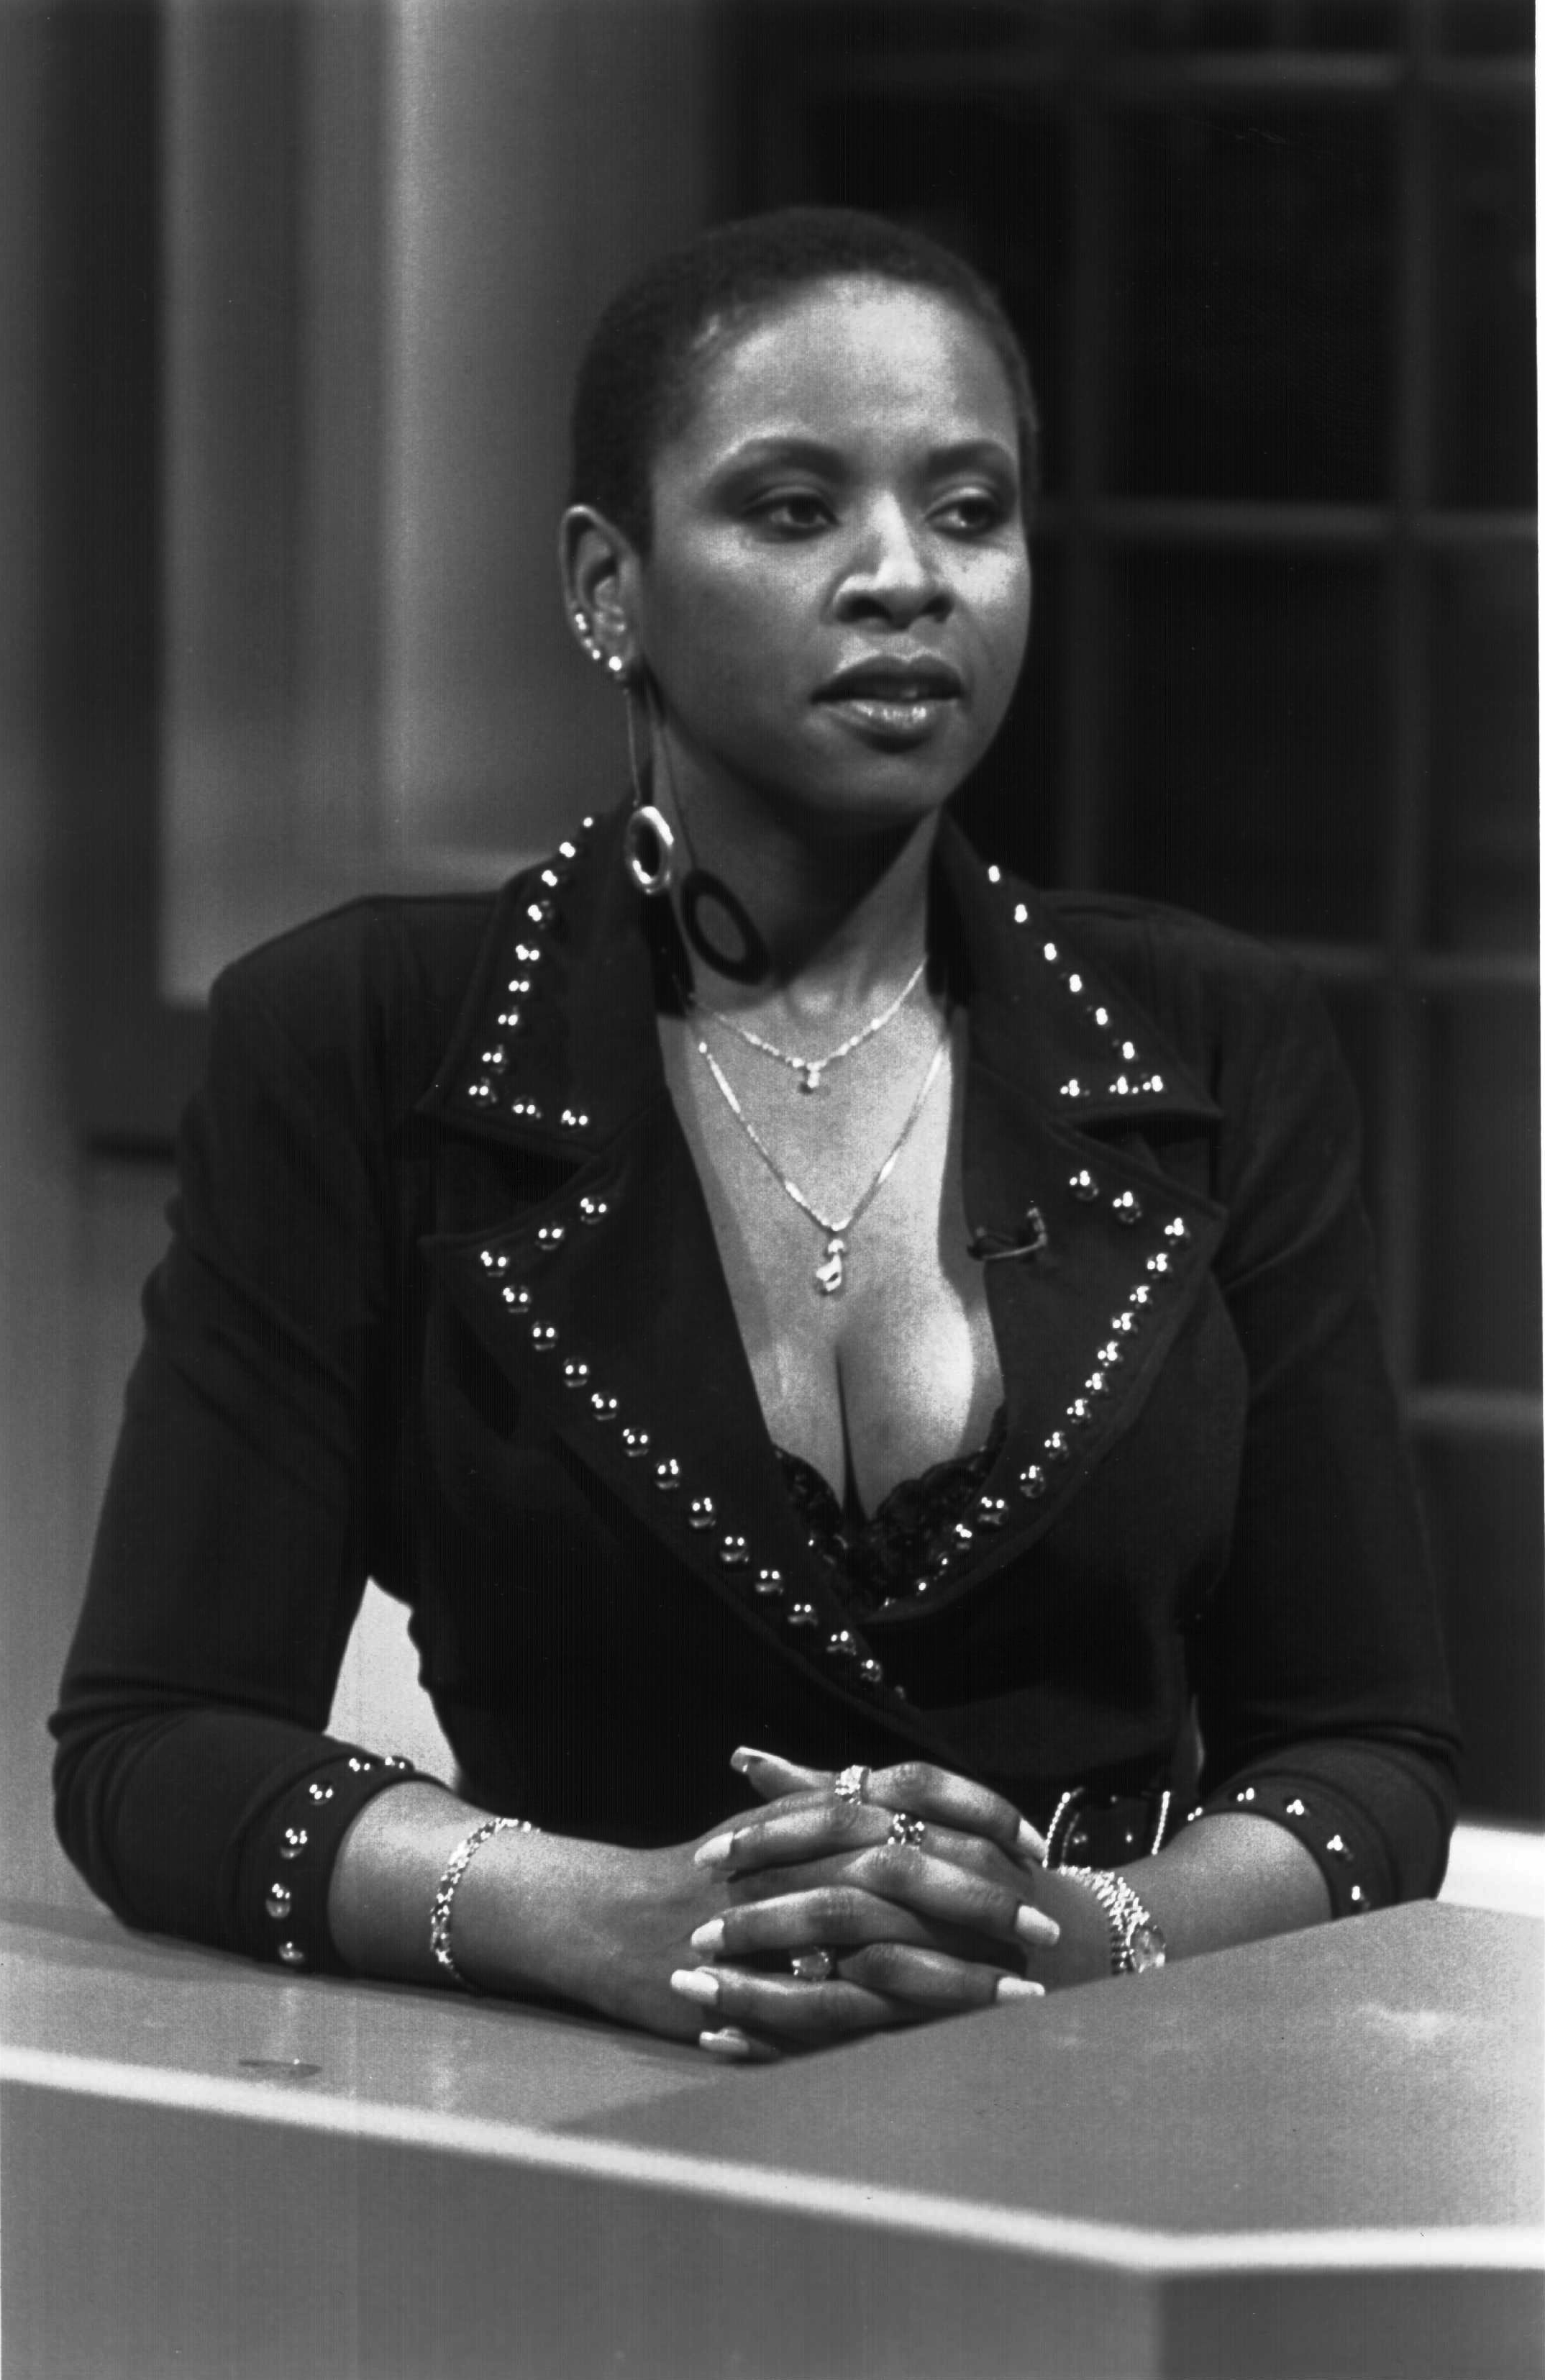 Robin quivers movies and tv shows